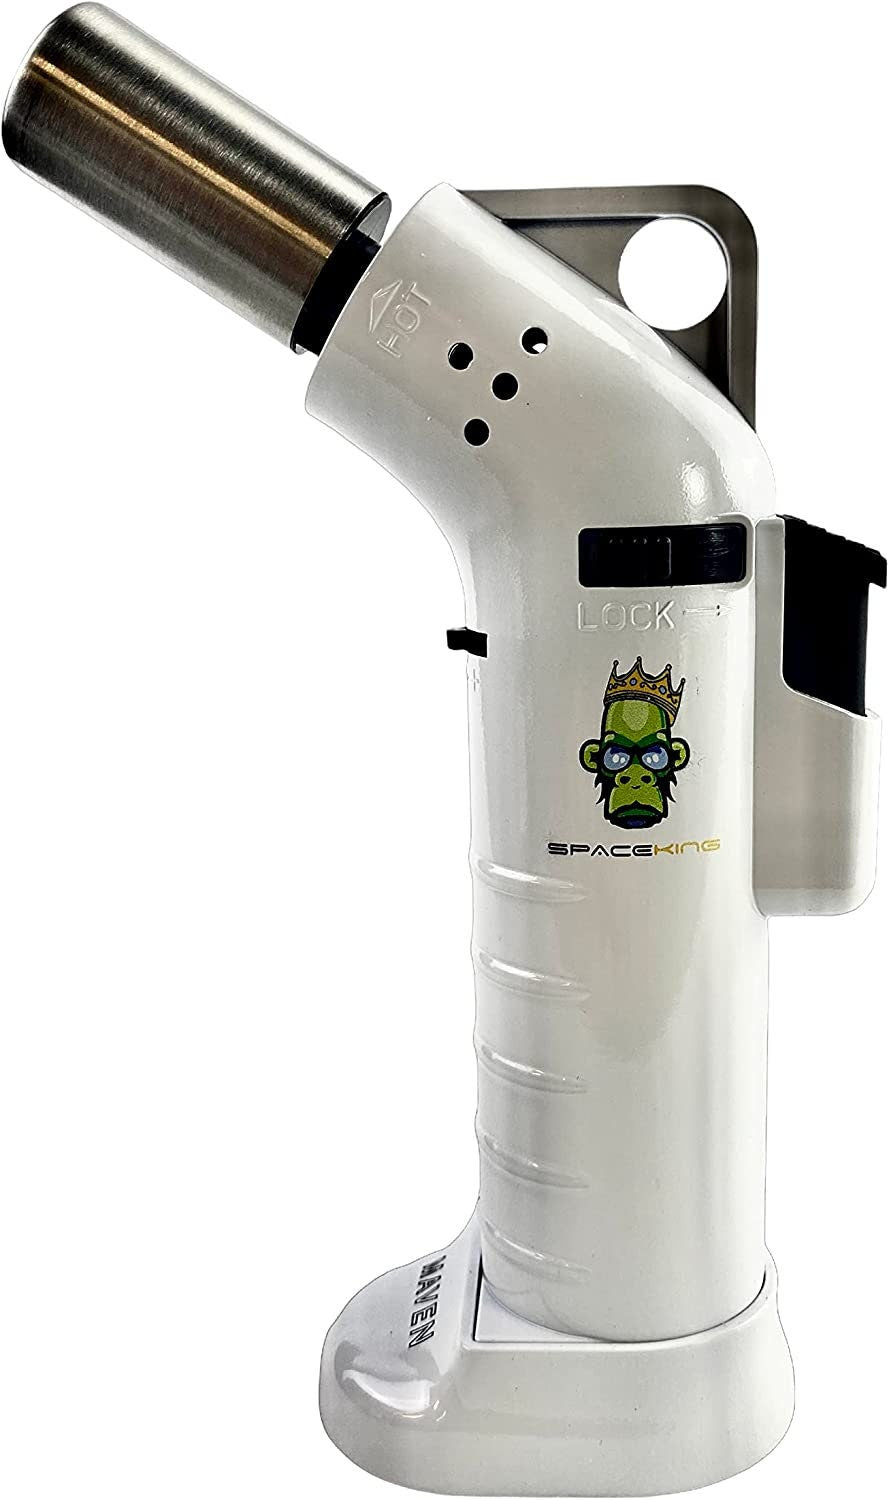 Space King powerful single jet angled flame torch lighter - Smooth Finish - Premium Quality - Adjustable Flame & Lock Function (White)